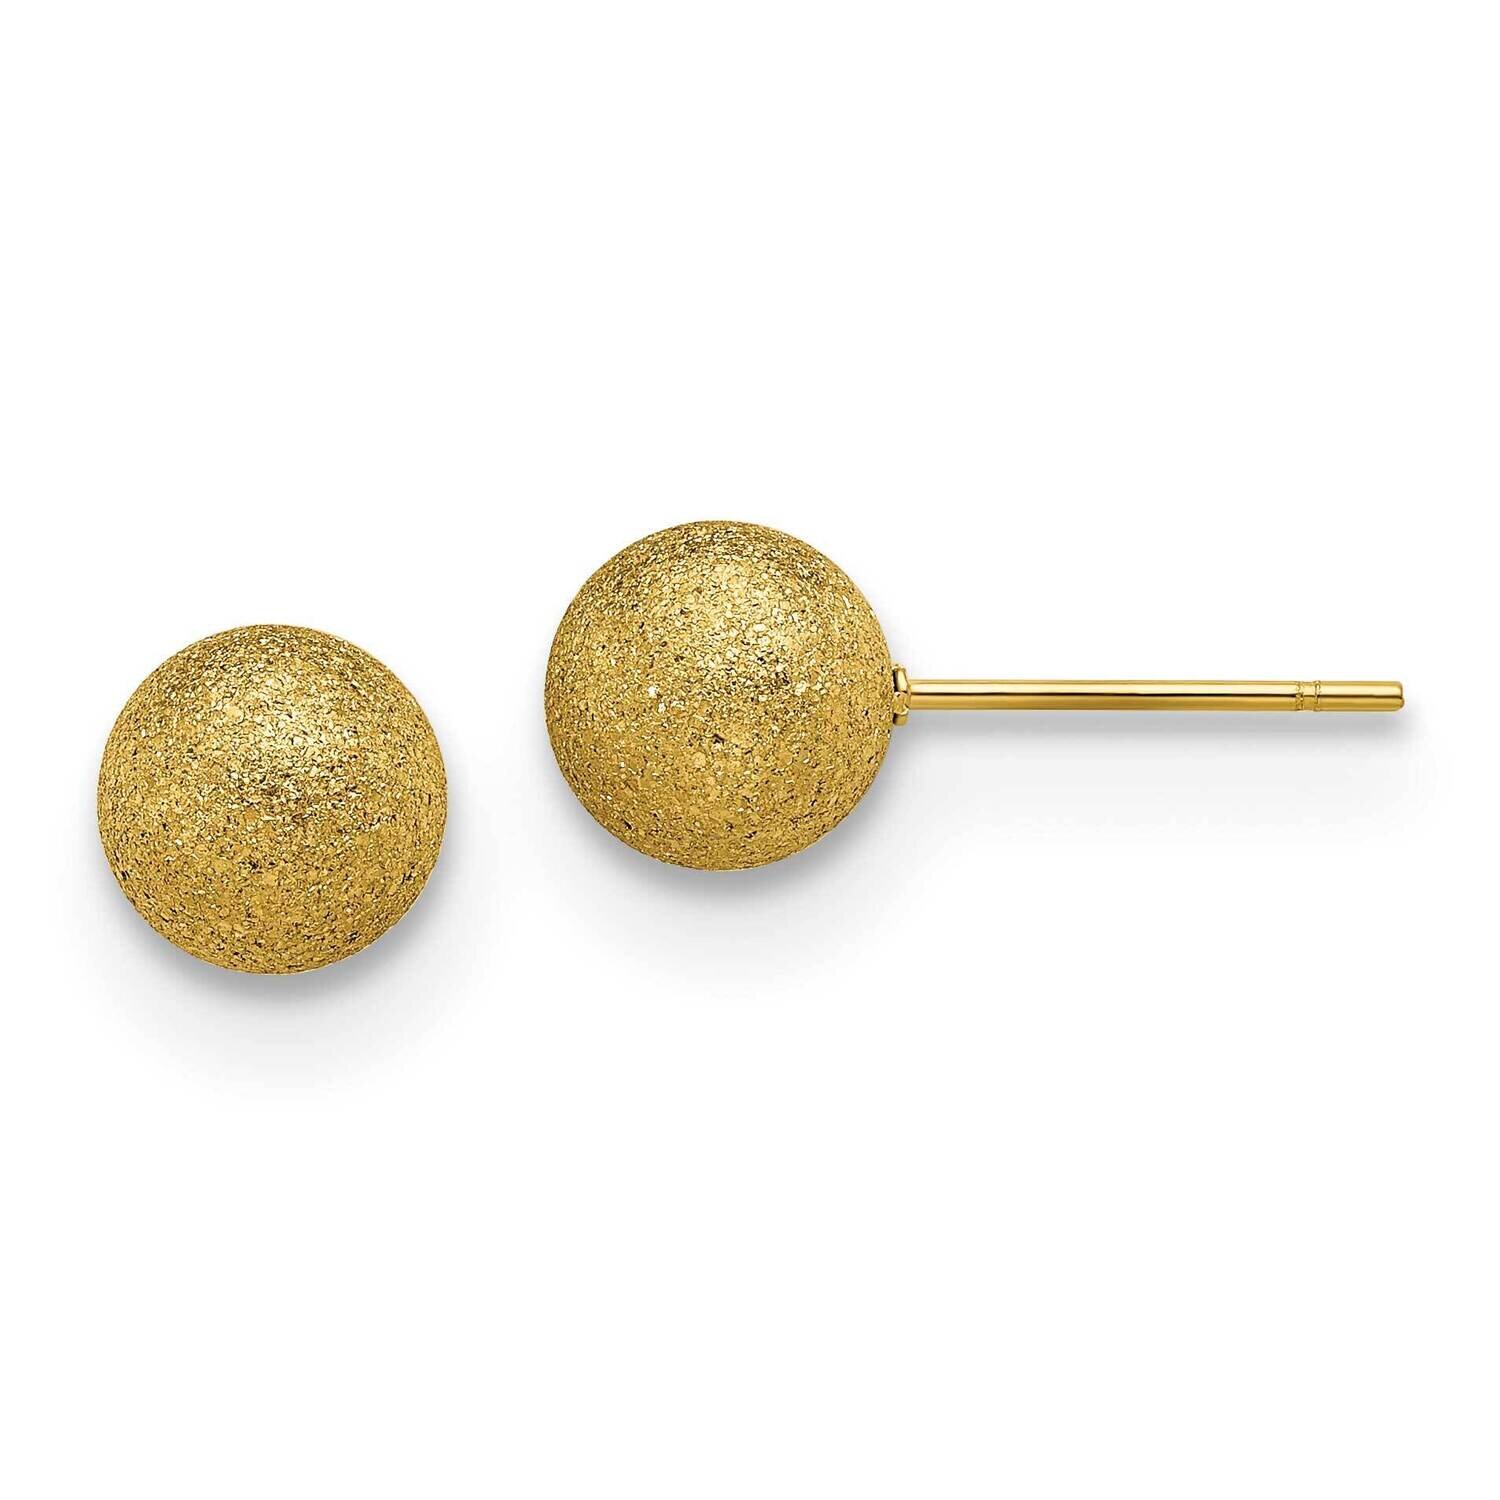 Laser Cut Yellow Ip-Plated 8mm Ball Post Earrings Stainless Steel Polished SRE1435